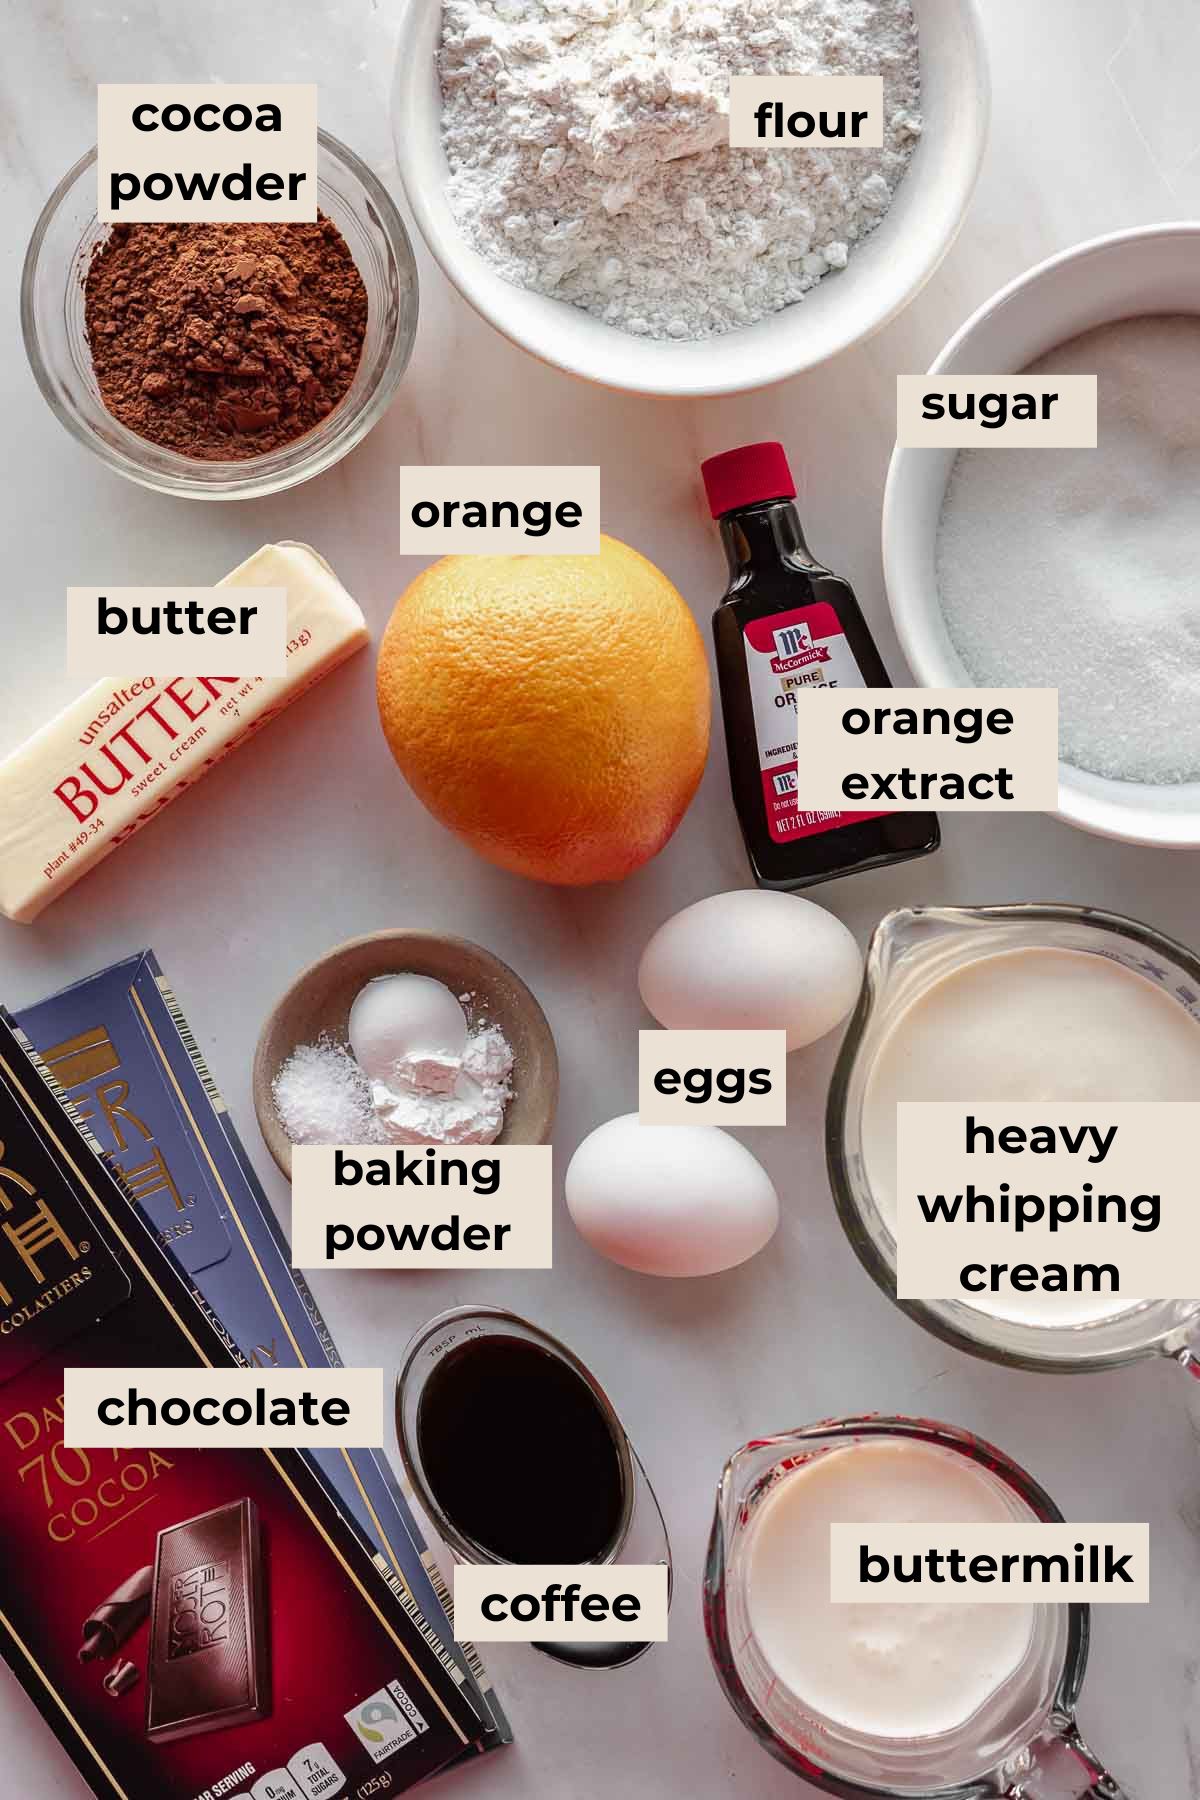 Ingredients for Terry's chocolate orange cake.